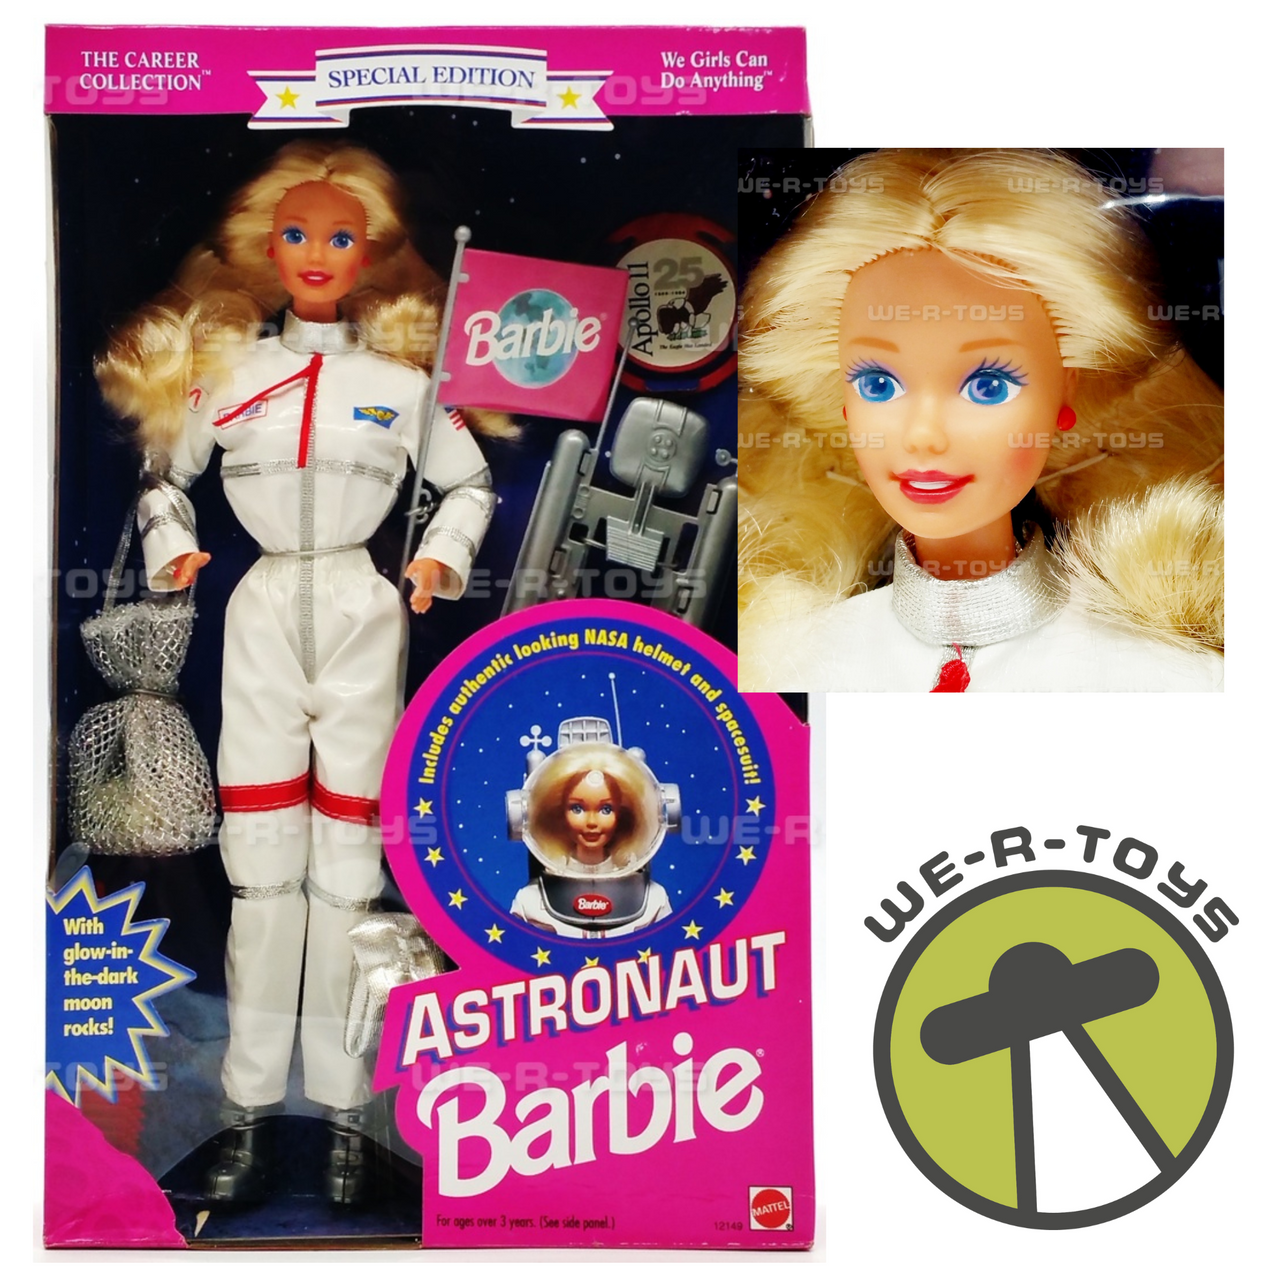 Astronaut Barbie Doll The Career Collection Special Edition 1994 Mattel no  12149